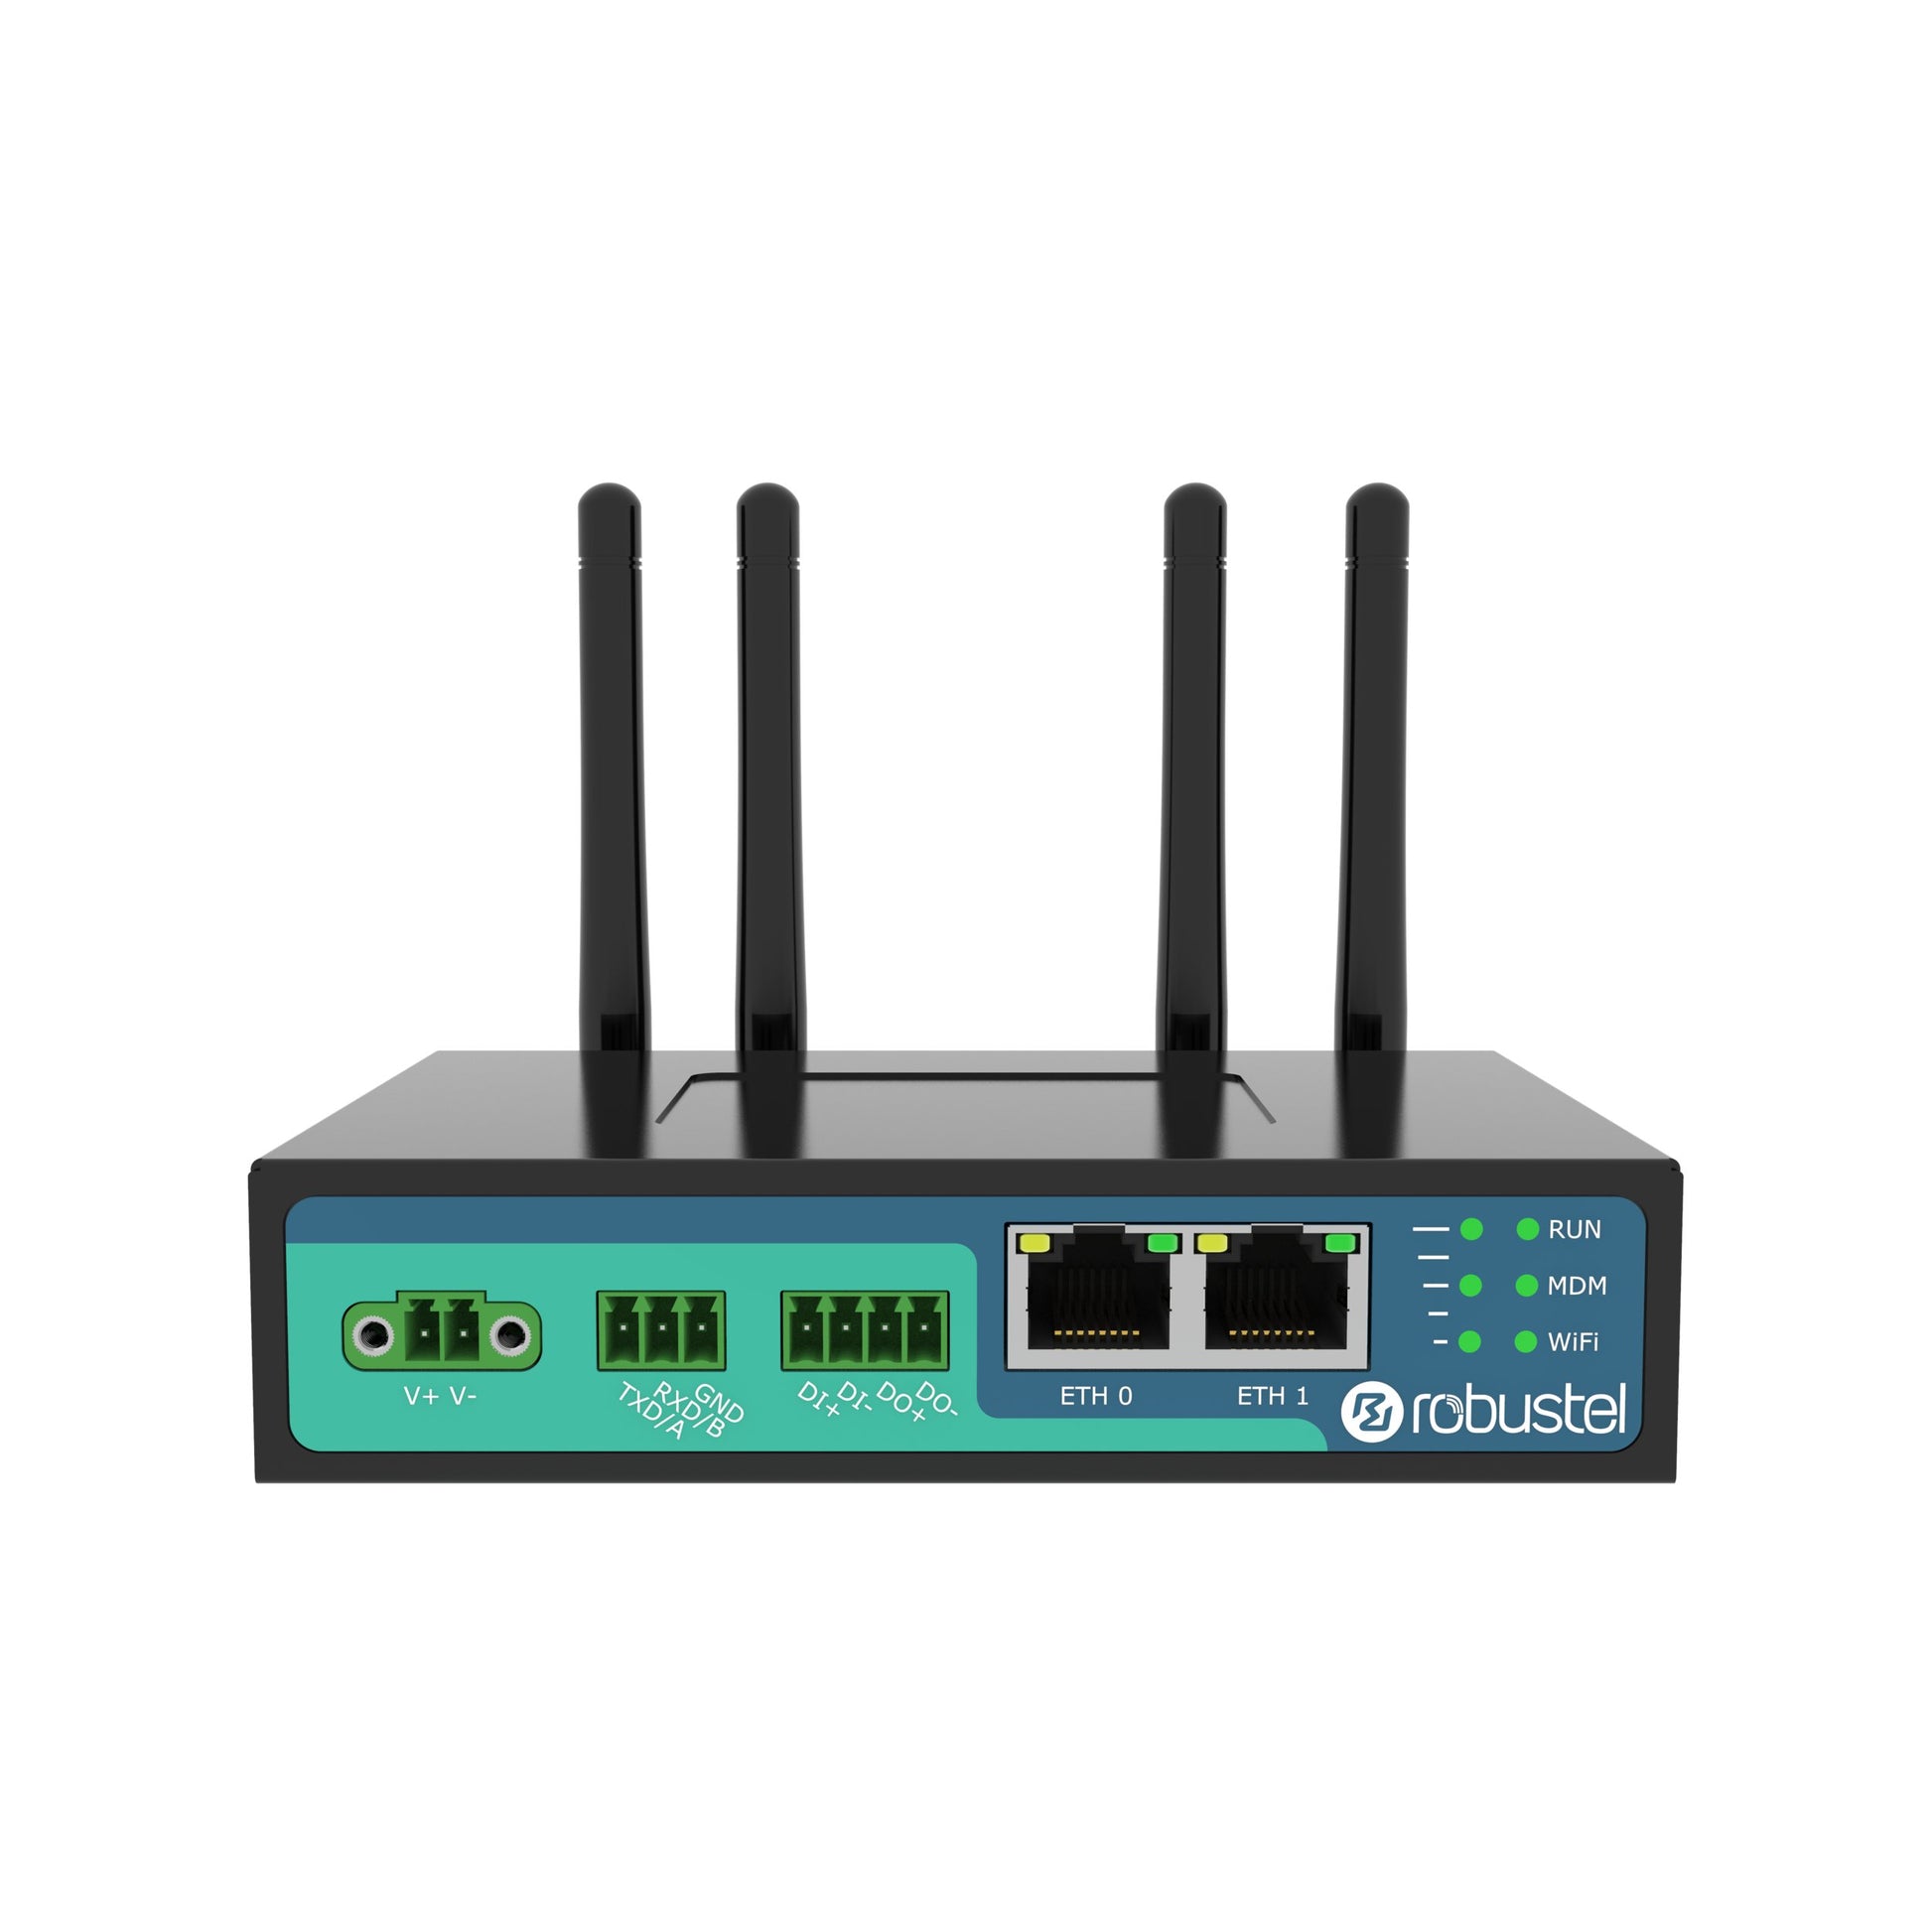 Robustel R2010 Dual-SIM VPN IoT Router - Blue Wireless Store